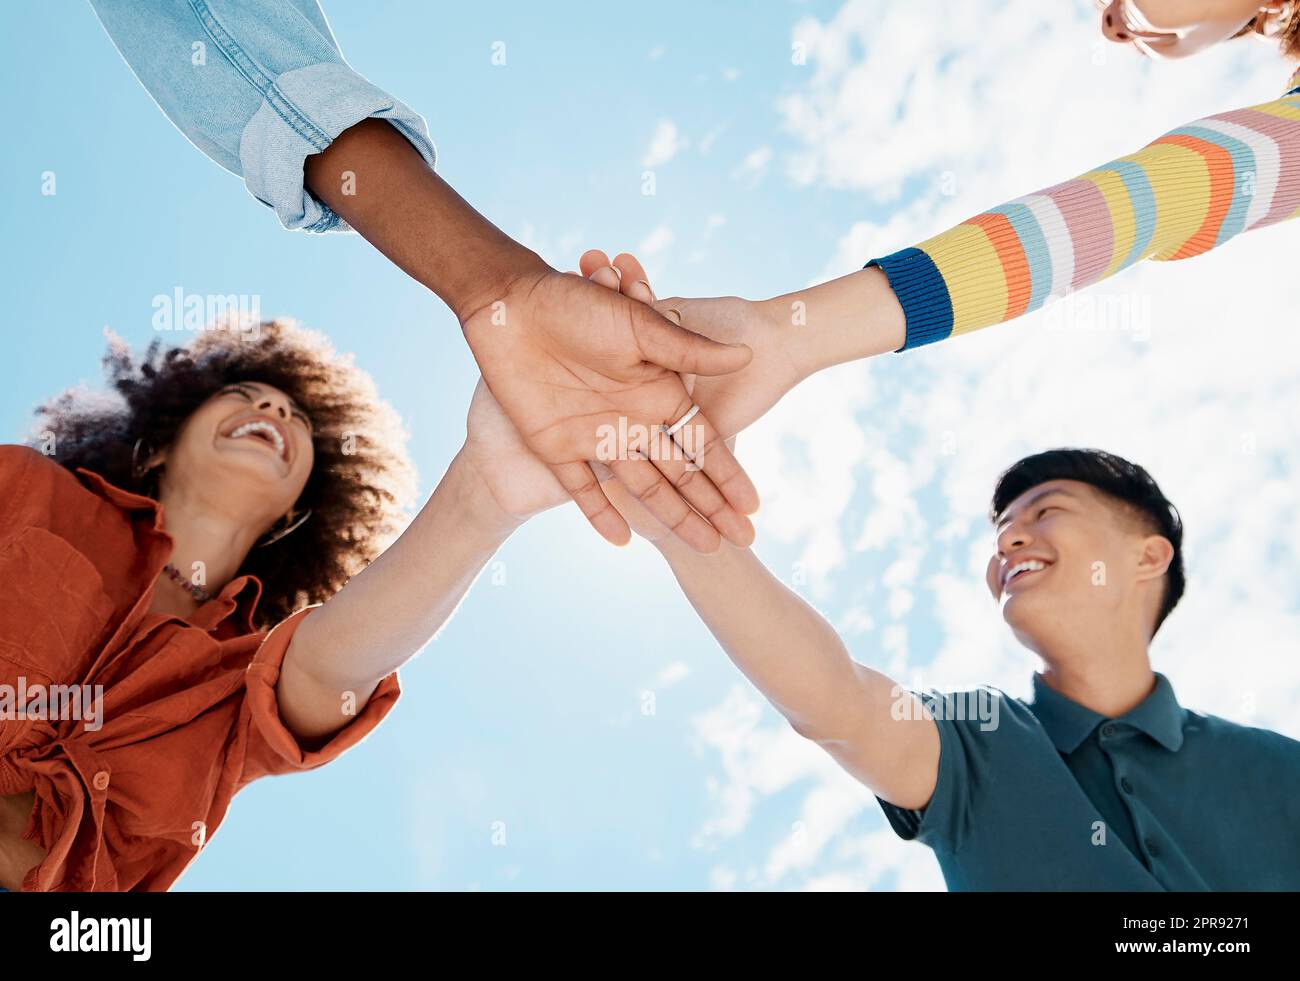 A low close up view of a group of diverse young friends joining hands in a huddle while smiling with a blue sky in the background on a sunny day. Mixed race female with a cool afro hairstyle and her Stock Photo